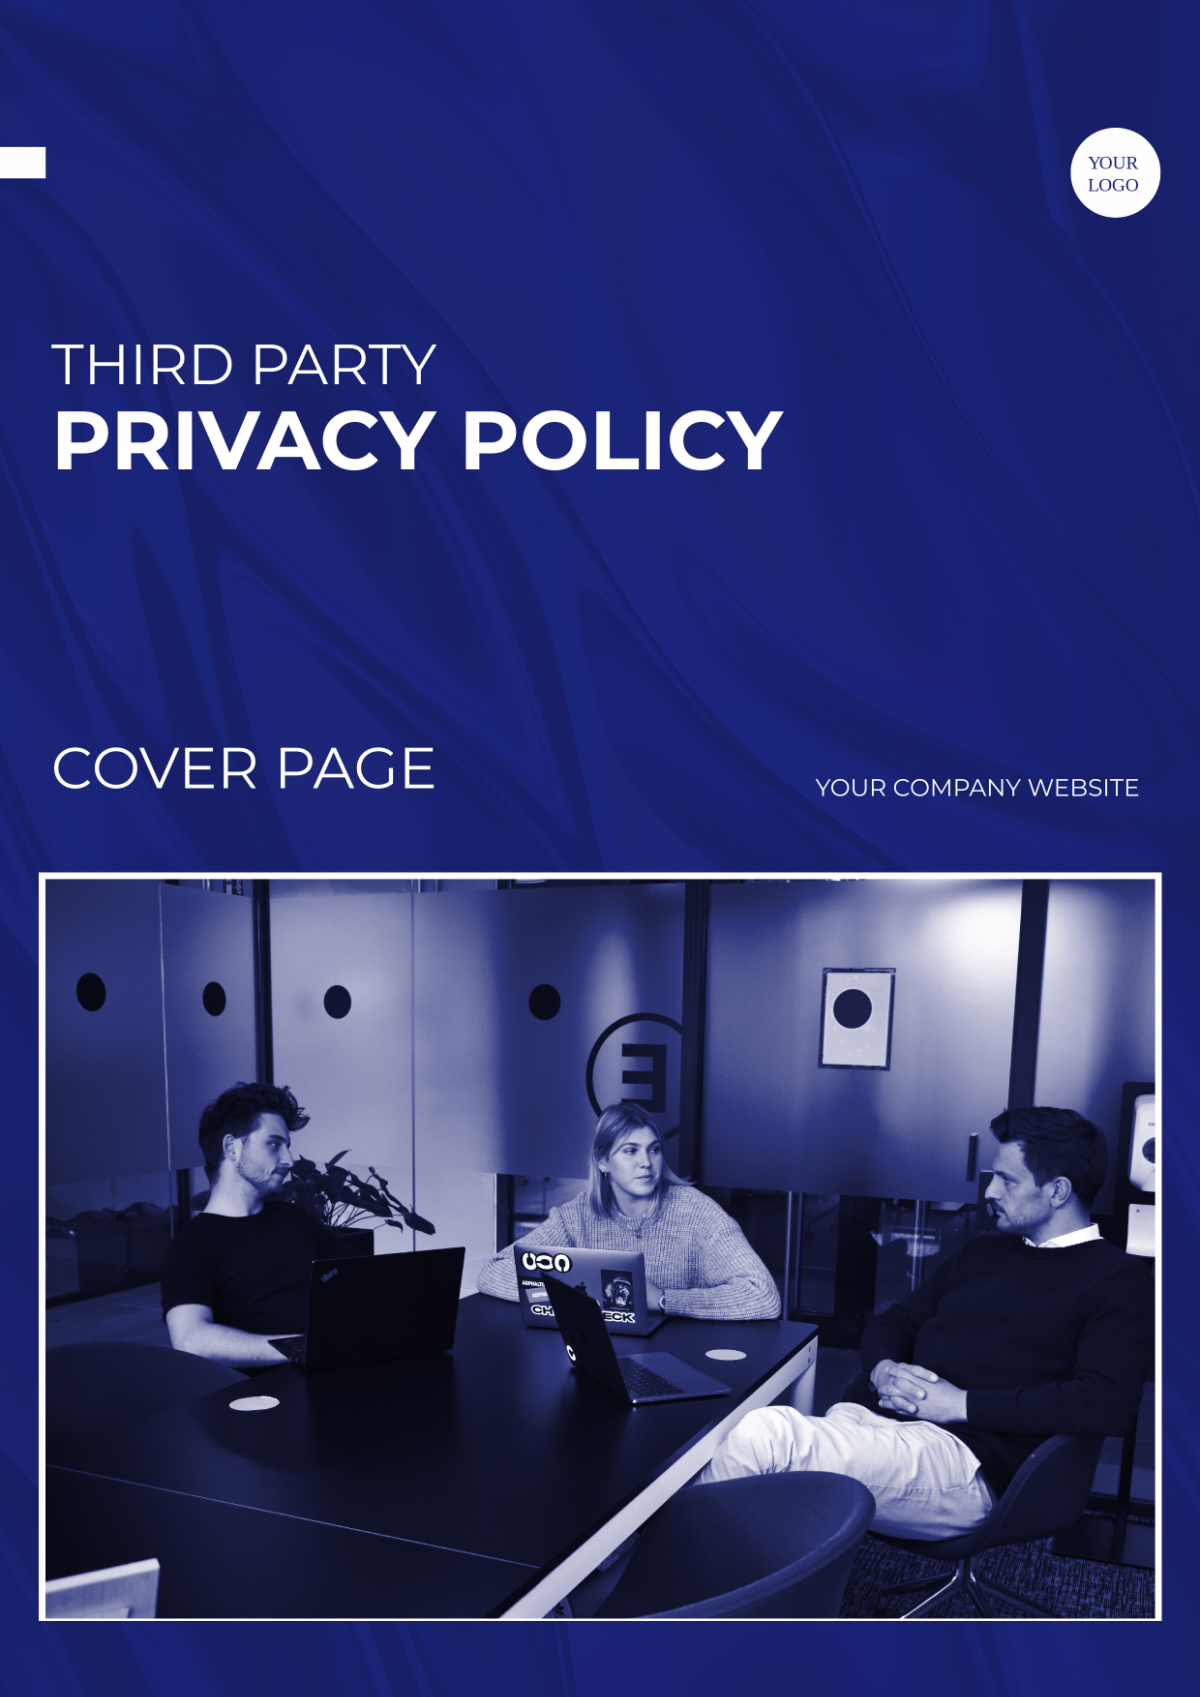 Third Party Privacy Policy Cover Page